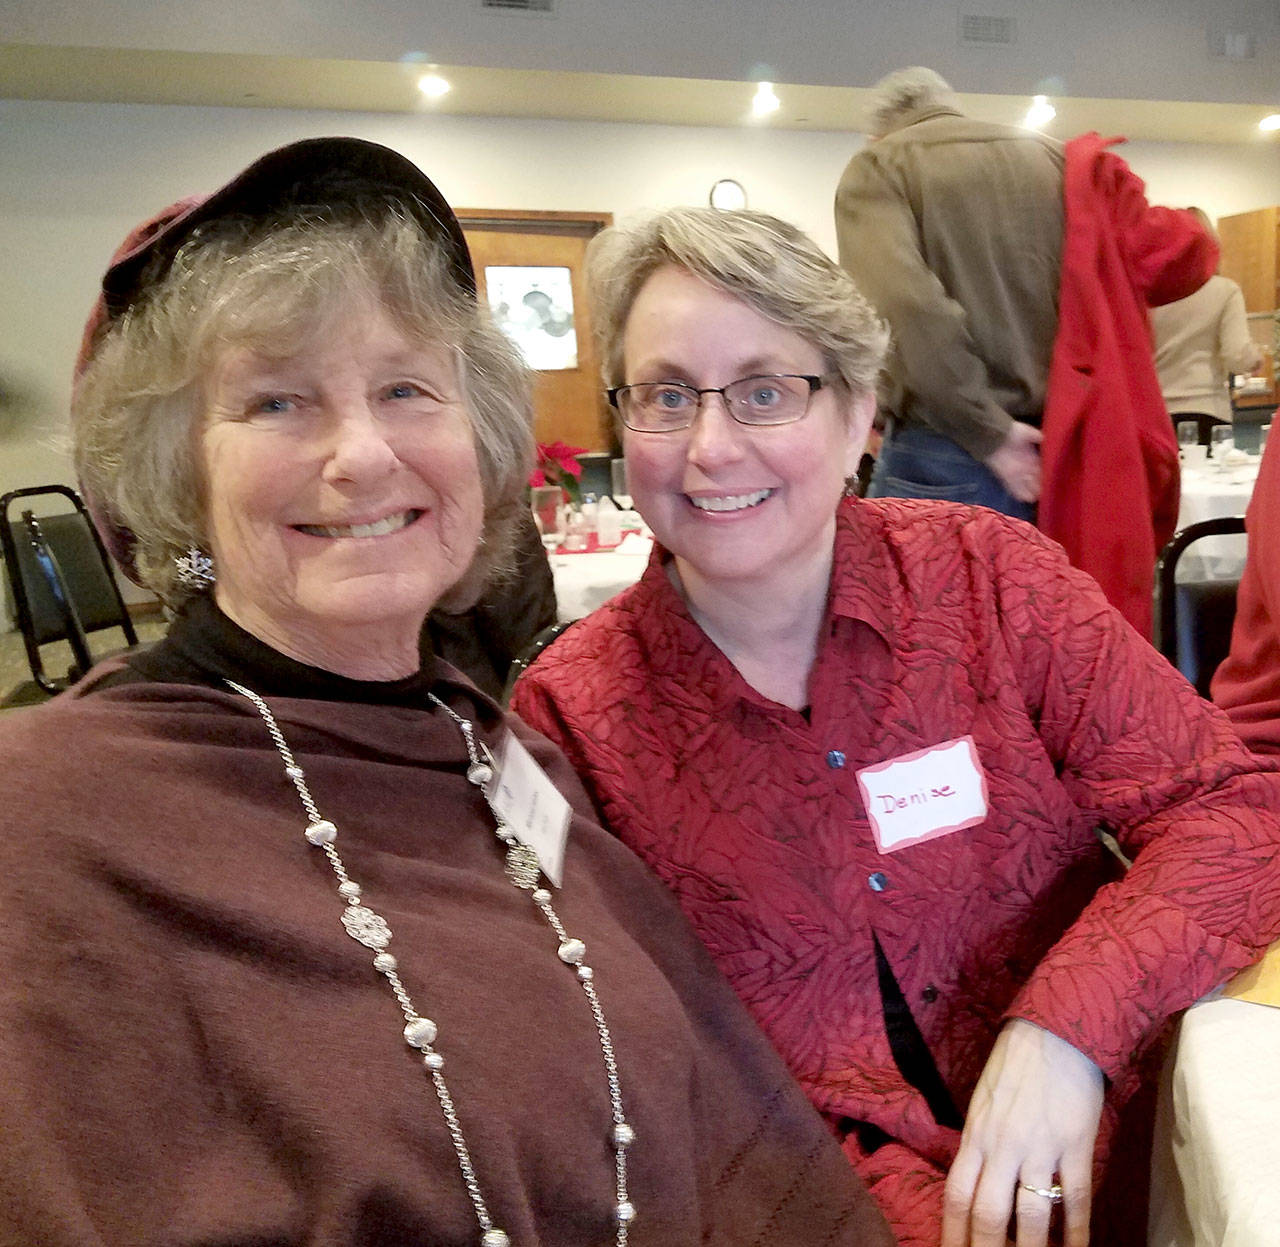 Denise Winter, recipient of the Port Townsend American Association of University Women Woman of Excellence Award, right, poses with Michael Kubec, the chair of the Woman of Excellence committee.